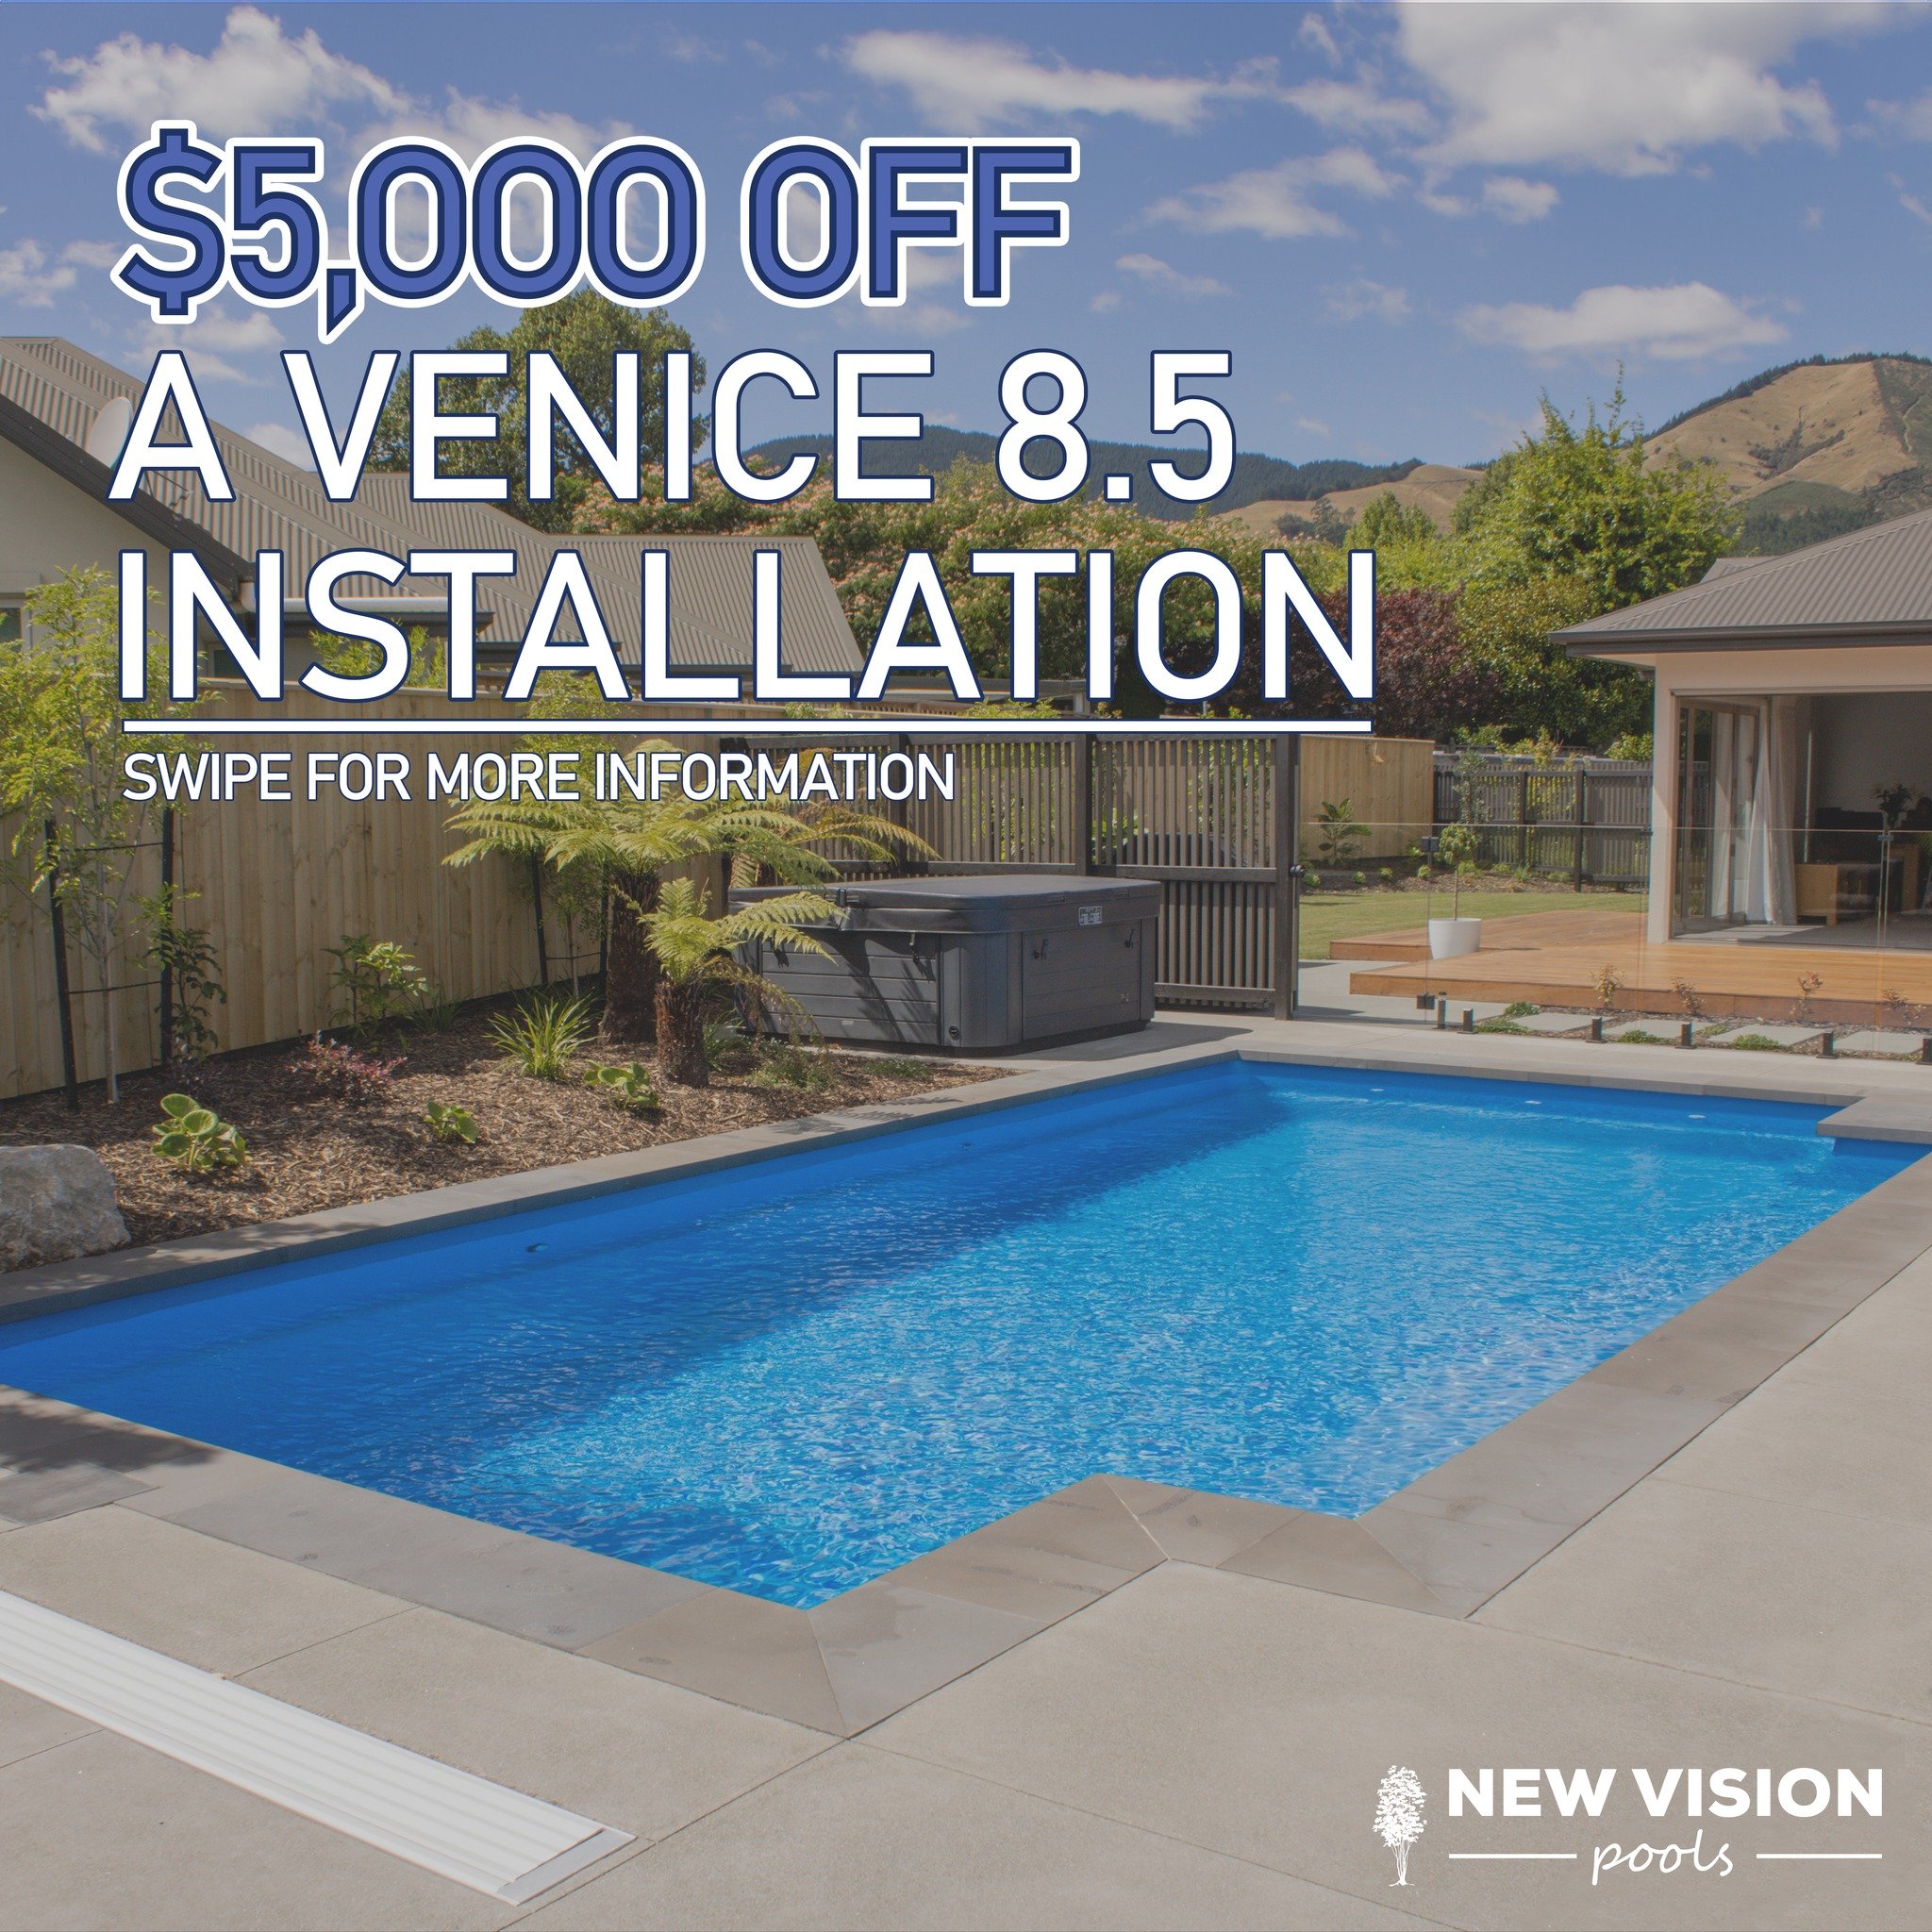 $5,000 off installation!!! 💦 Check out our awesome deal for a Venice 8.5 pool install. 
Get in touch with Claire on 027 284 2449 for more information!